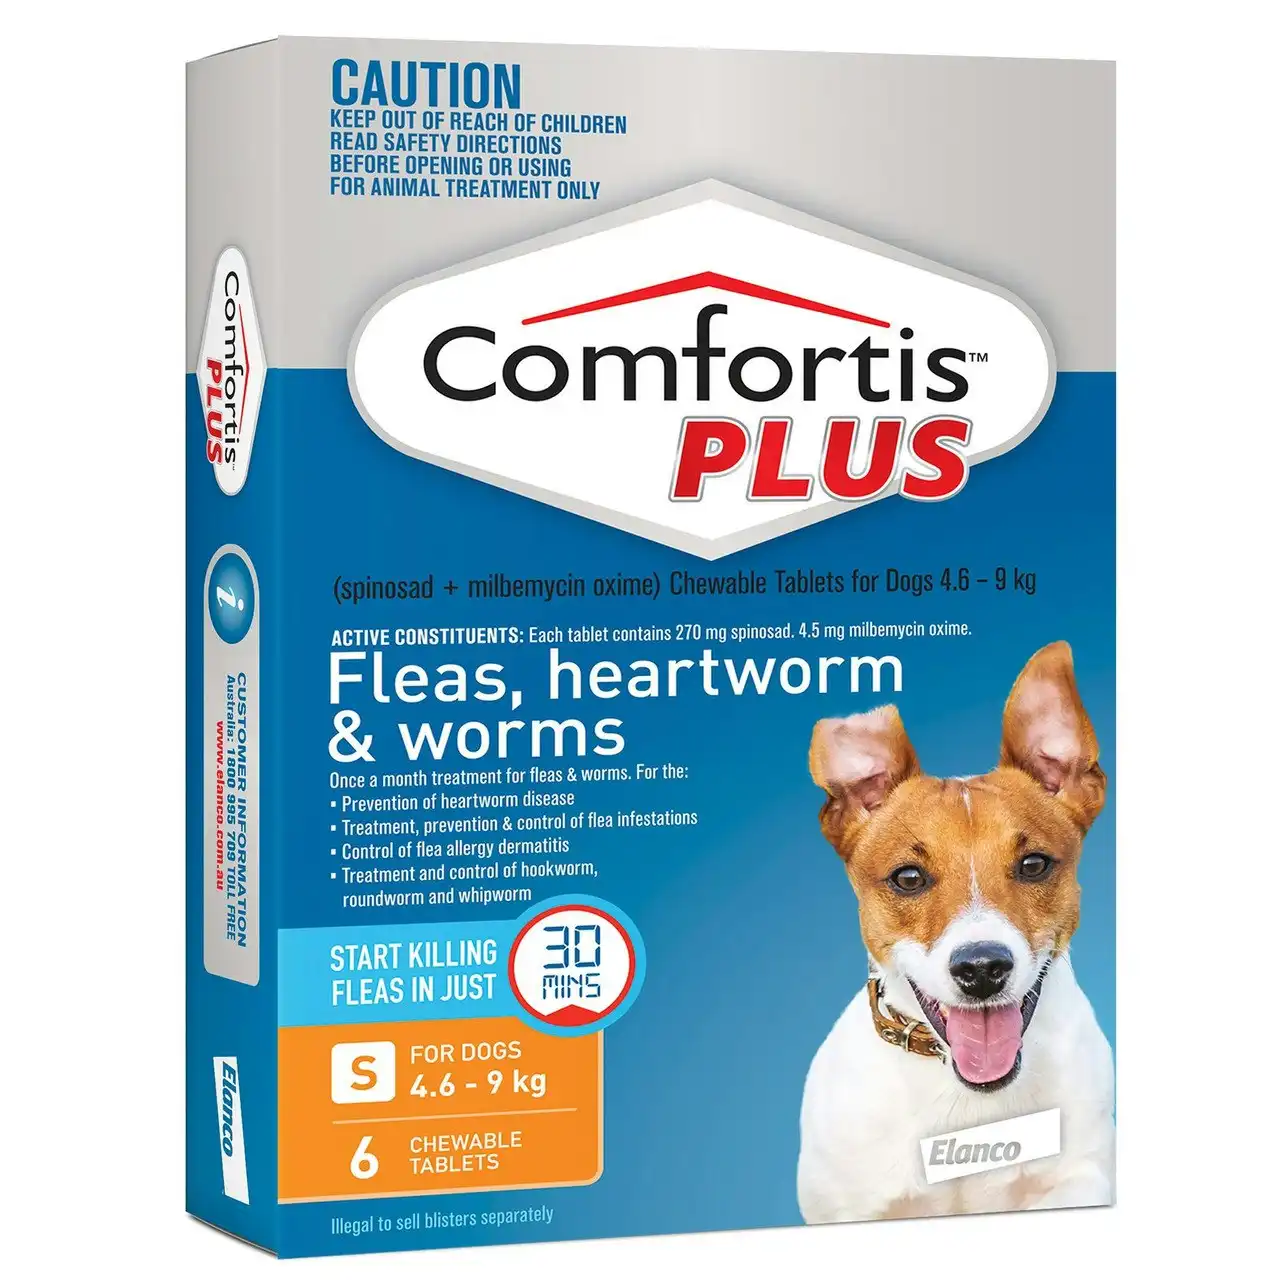 Comfortis(TM) PLUS Fleas, Heartworm & Worms for Dogs 4.6 - 9kg - 6 Pack